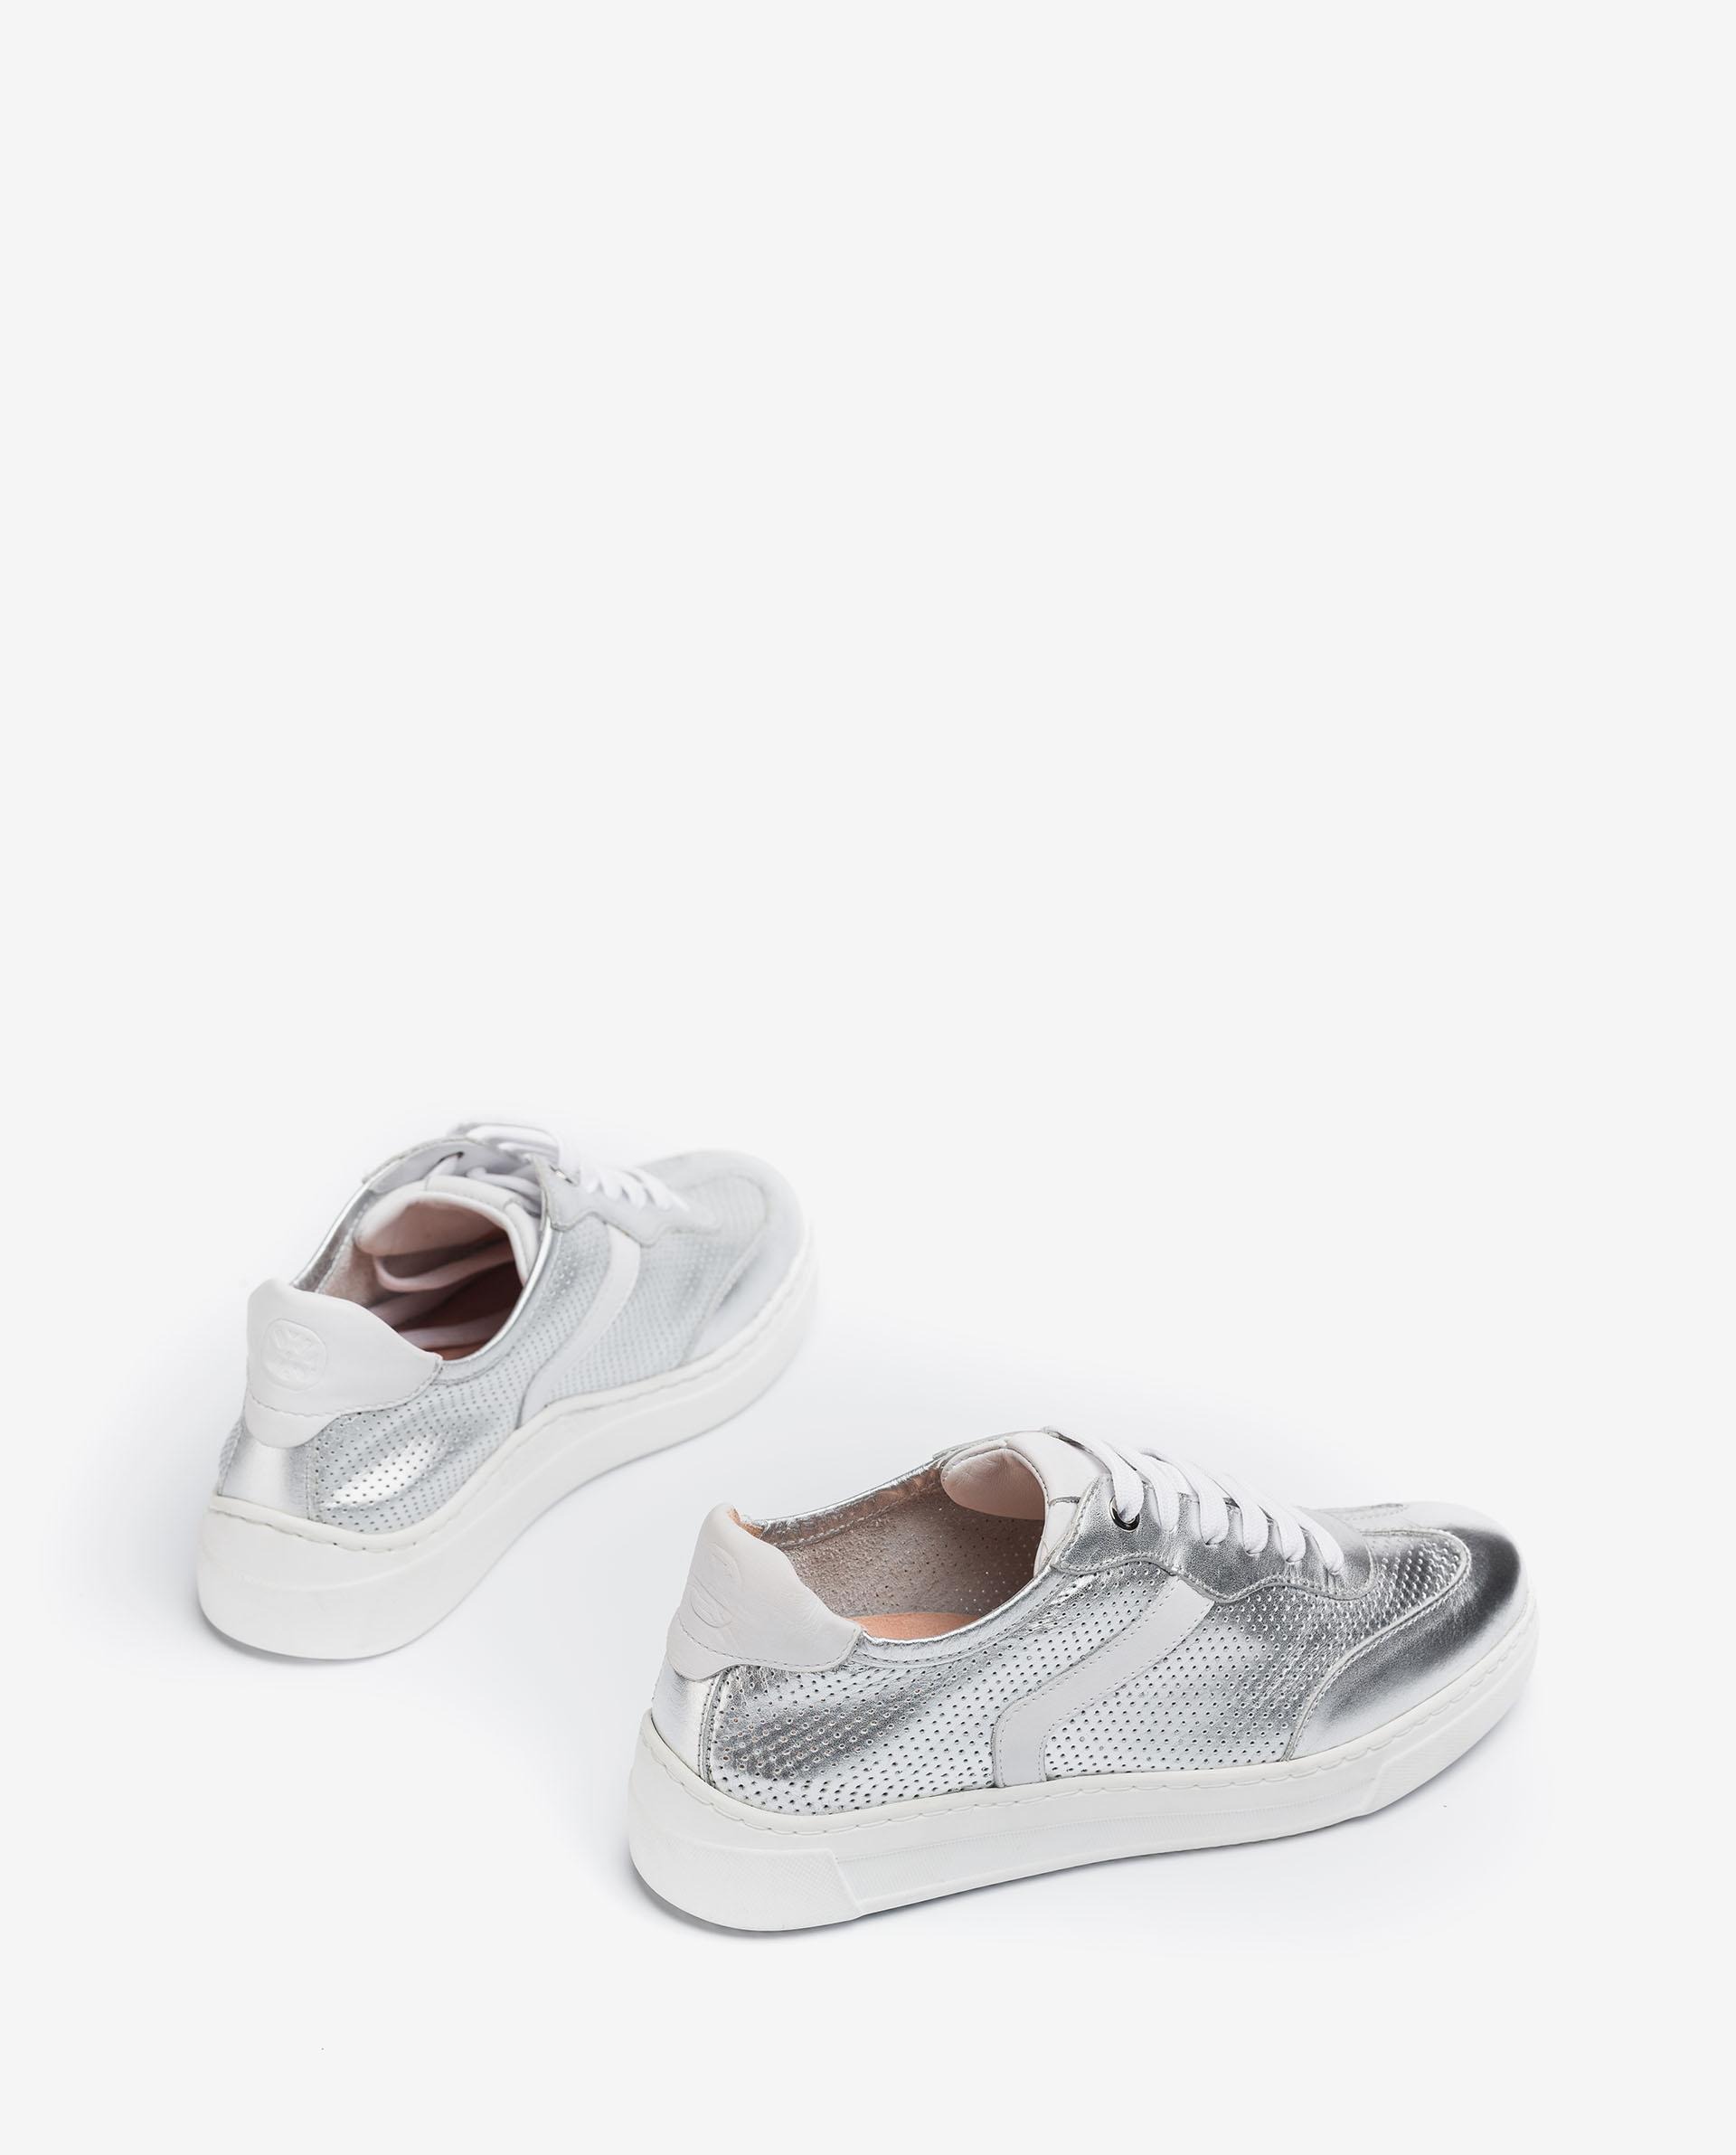 Unisa Chaussures de sport FUAD_NF SILVER/WHI